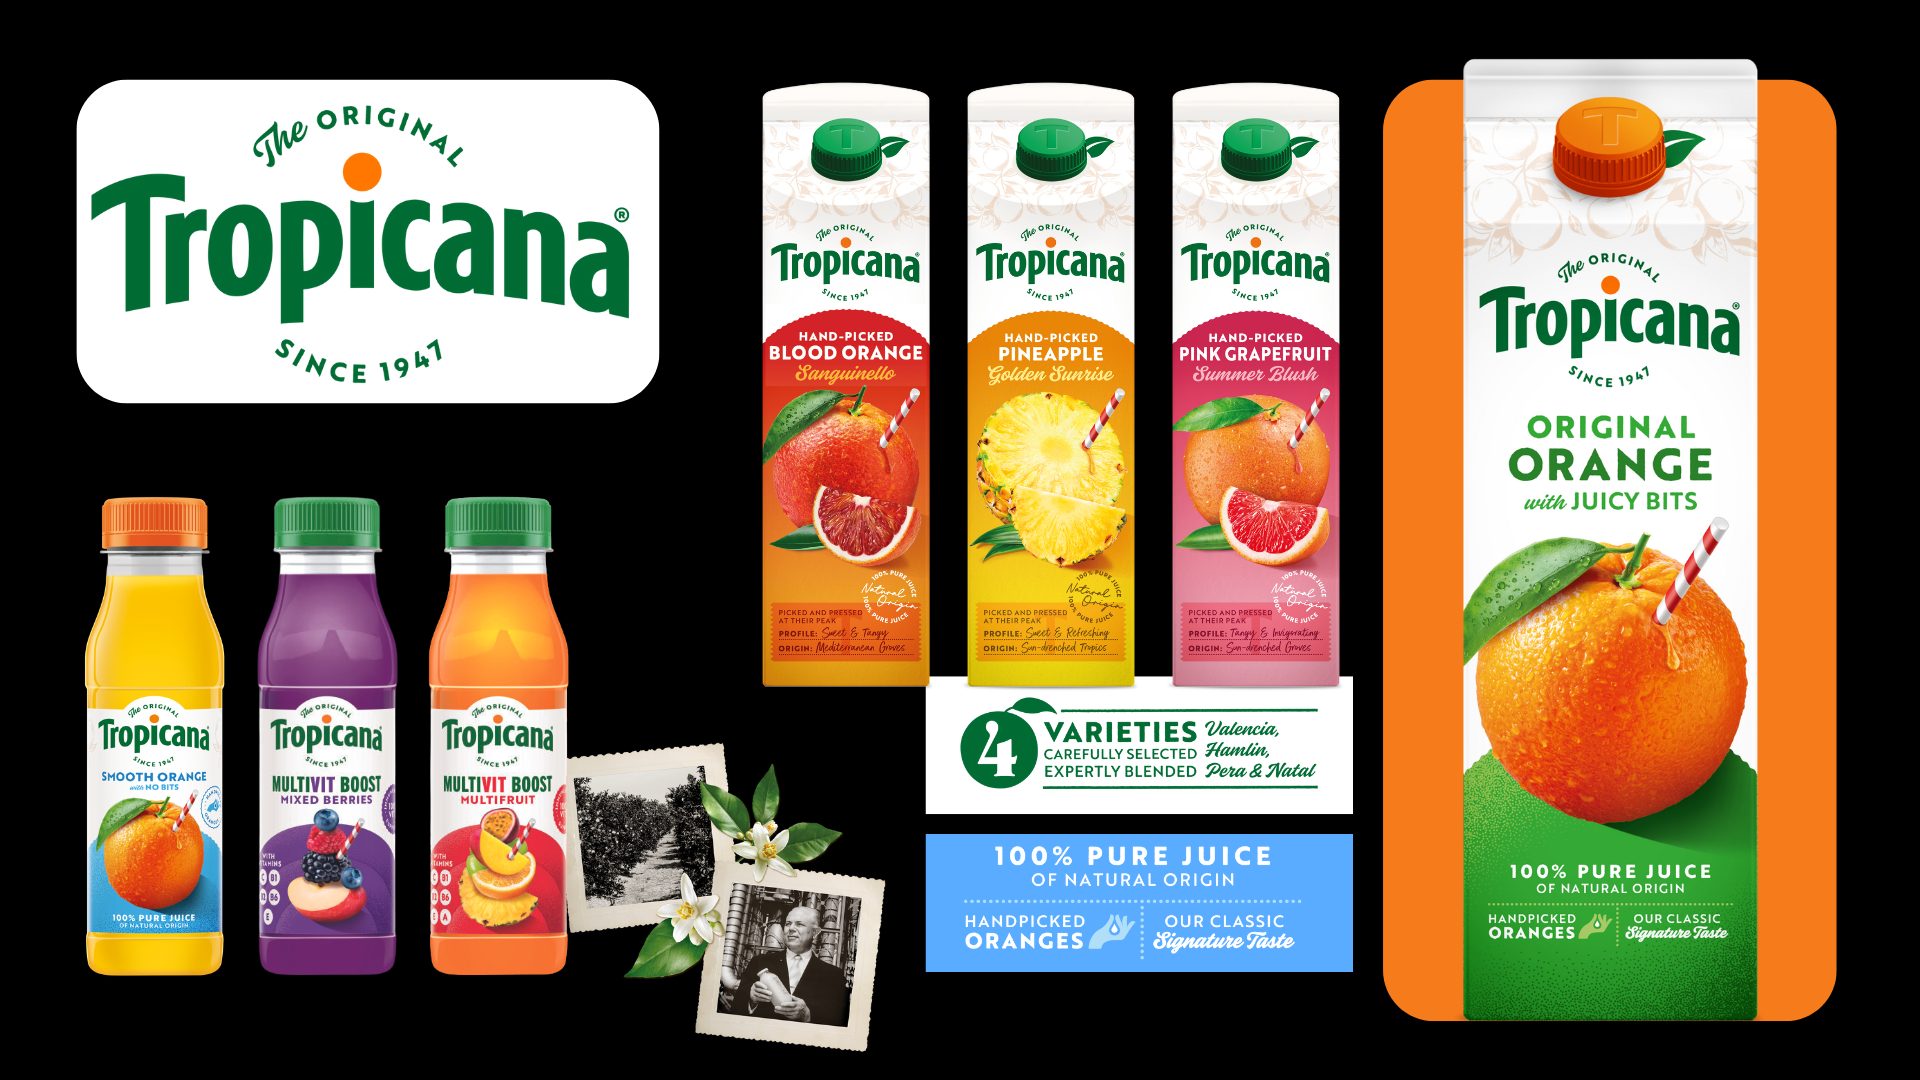 Rolling out refreshment for Tropicana image